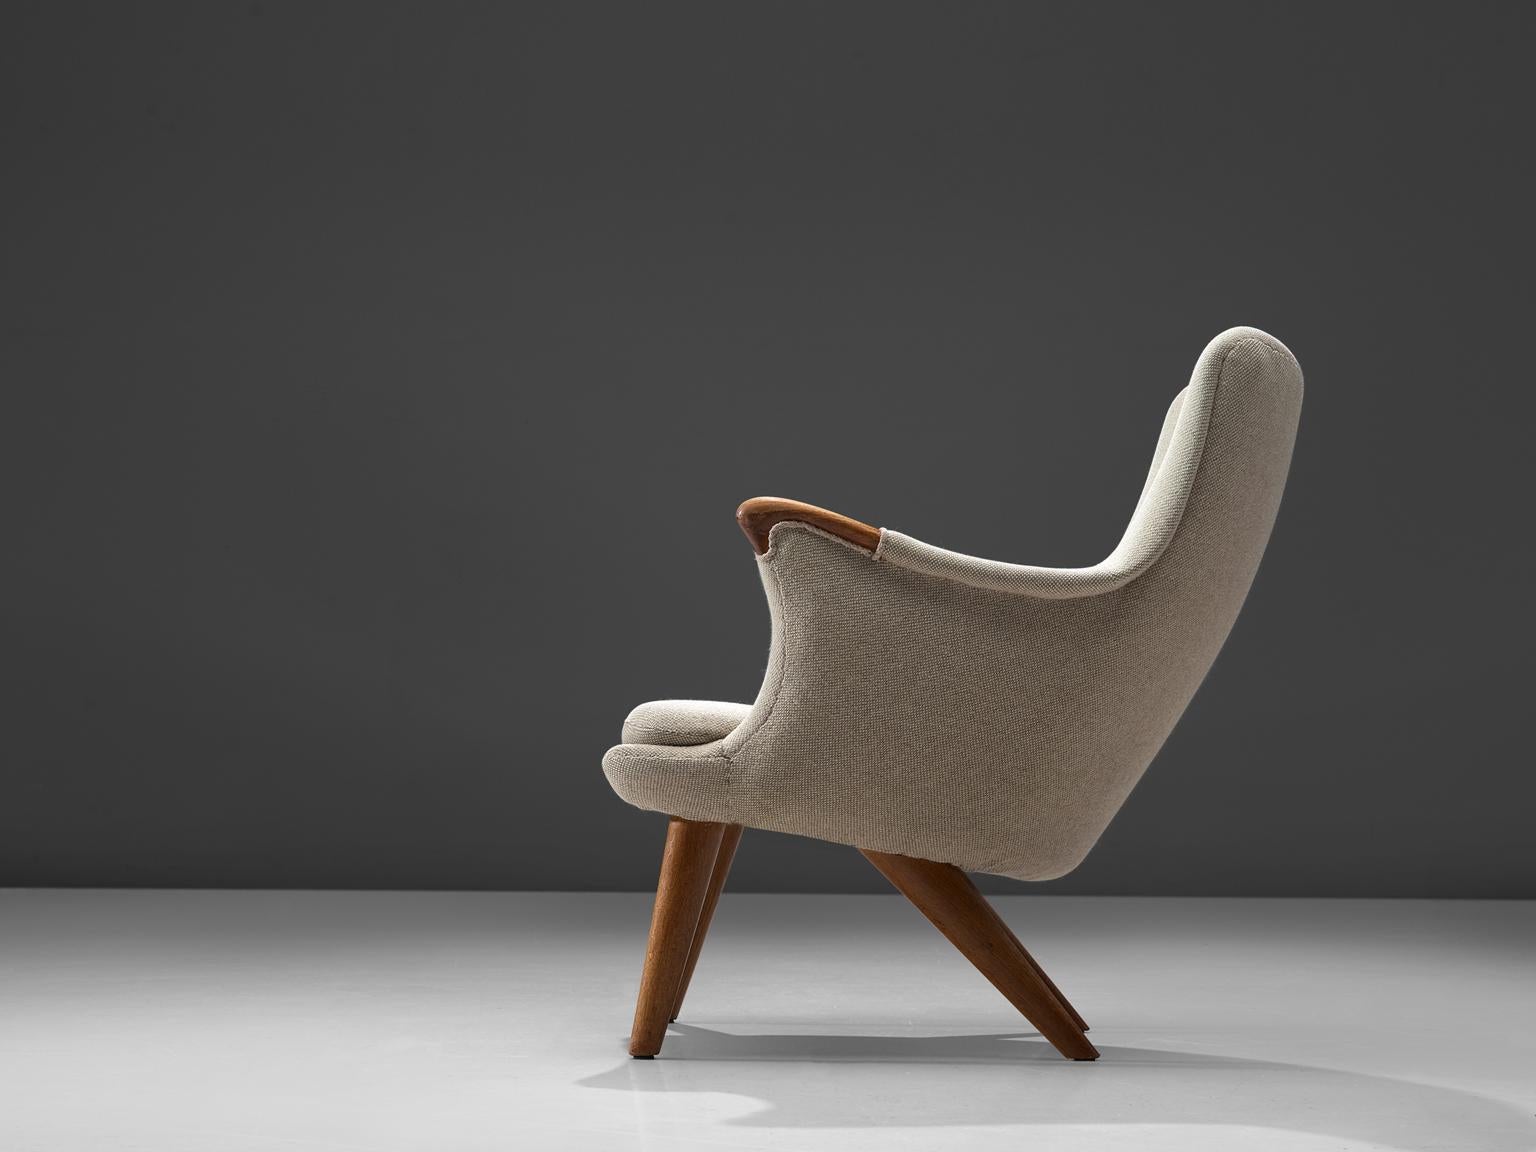 Danish armchair, oak and light grey fabric, Denmark, 1960s

This lounge chair has an open expression and an elegant shape due to its round shapes. The armrests have flow loosely in the seat, giving the idea of someone spreading its arms towards